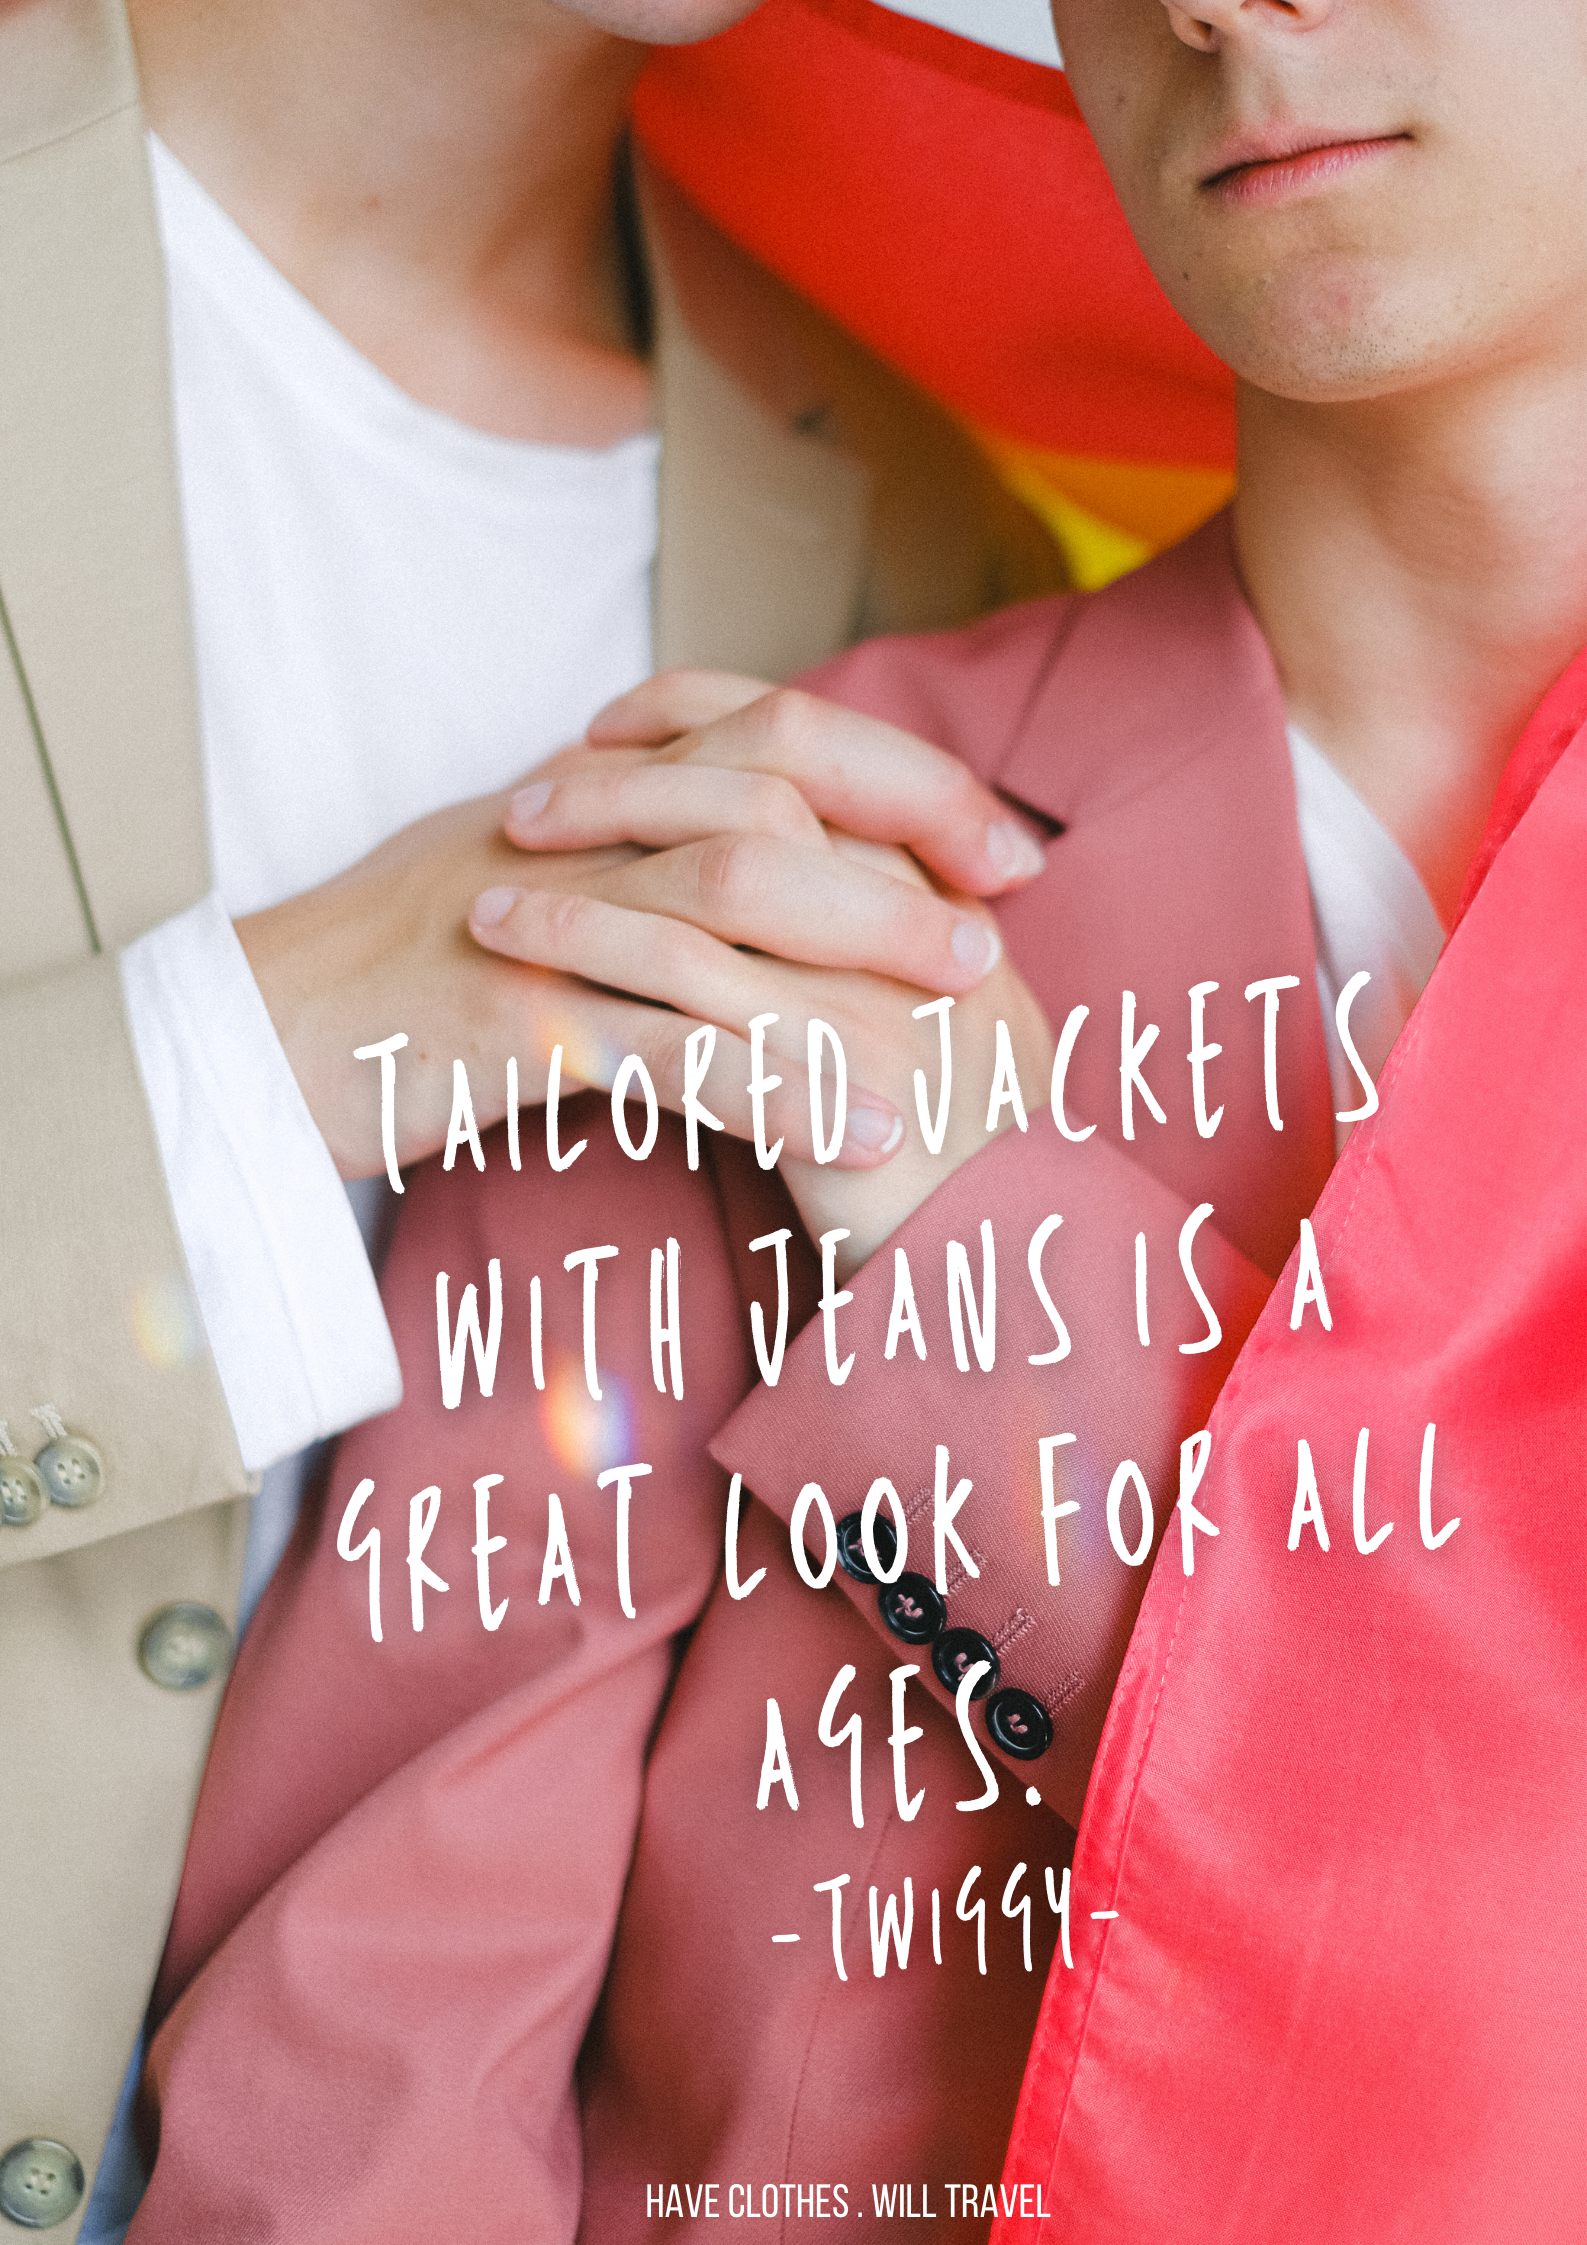 Two men pose together, holding hands -- the photo is a closeup of their torsos and hands. They're wearing tan and maroon colored suit jackets. Text over the image says, "Tailored jackets with jeans is a great look for all ages. – Twiggy"